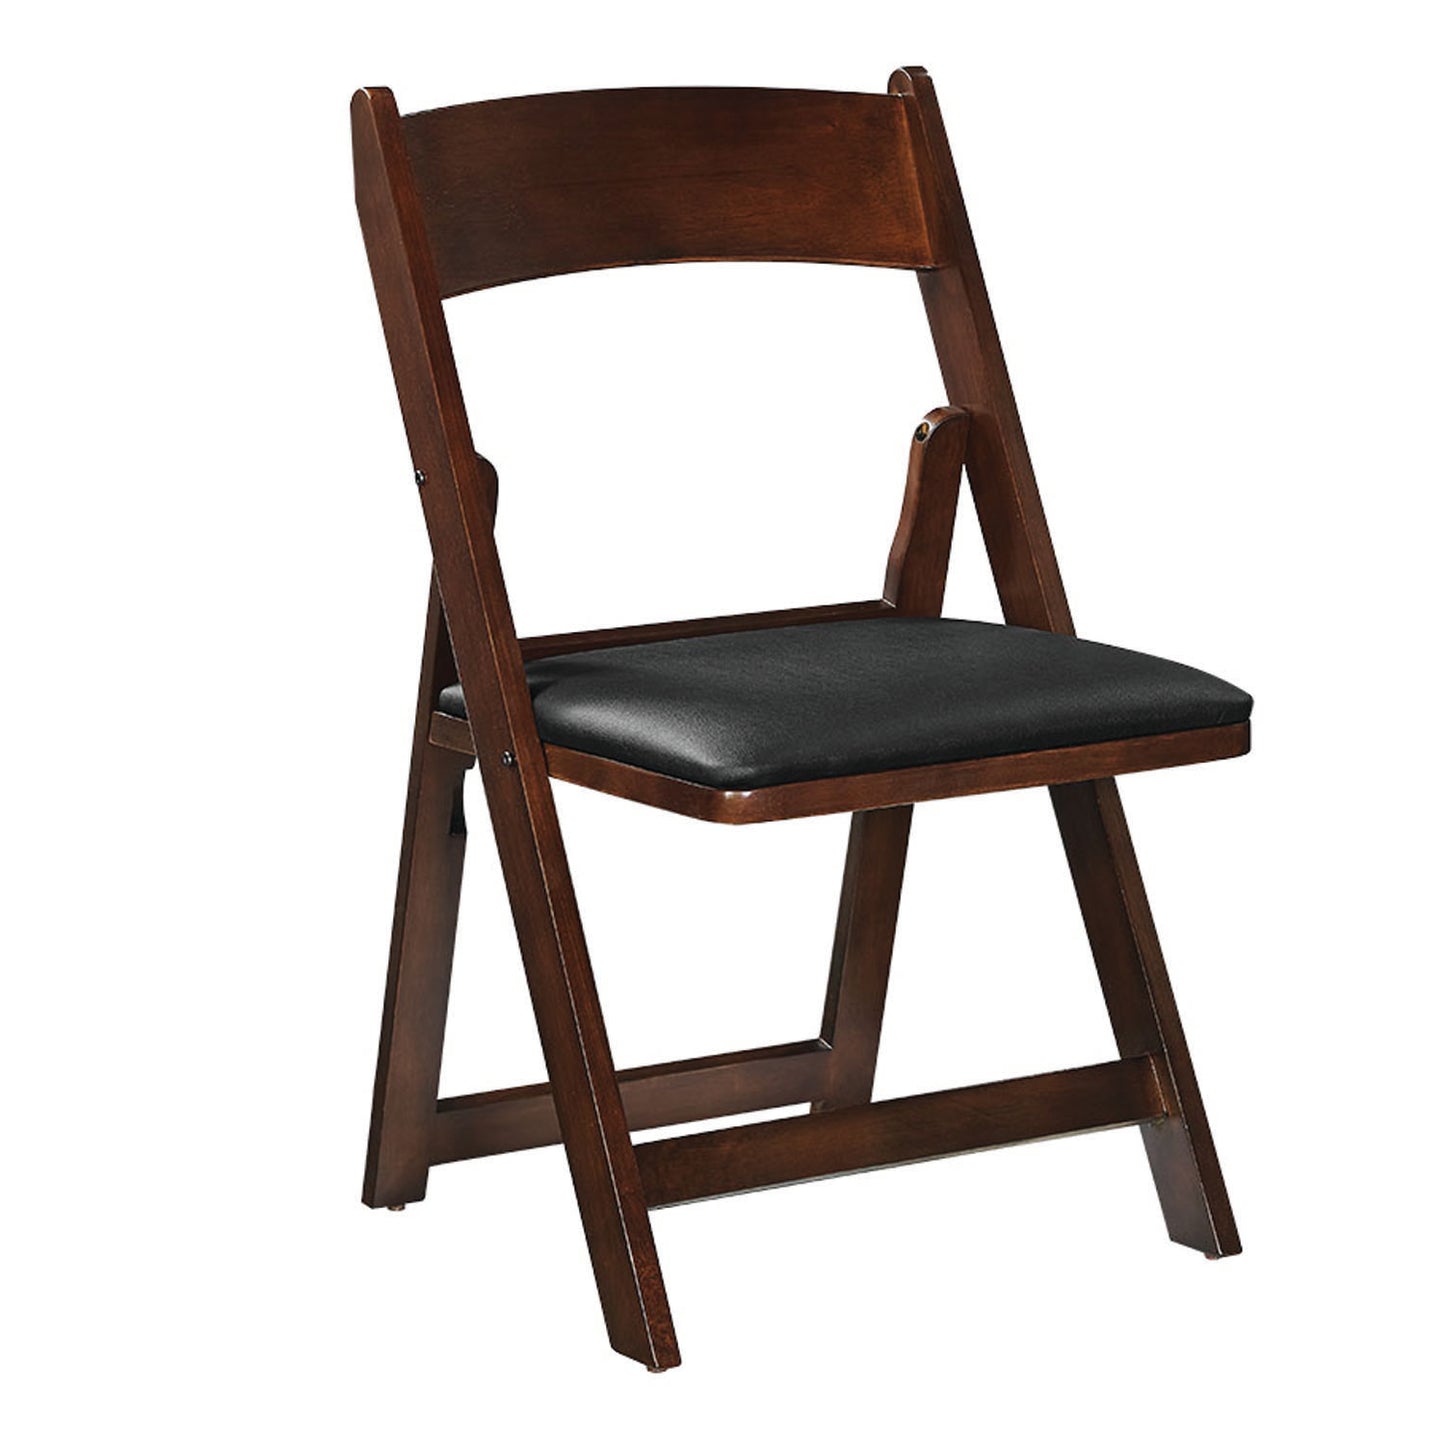 Wood vinyl padded folding chair in a cappuccino finish.